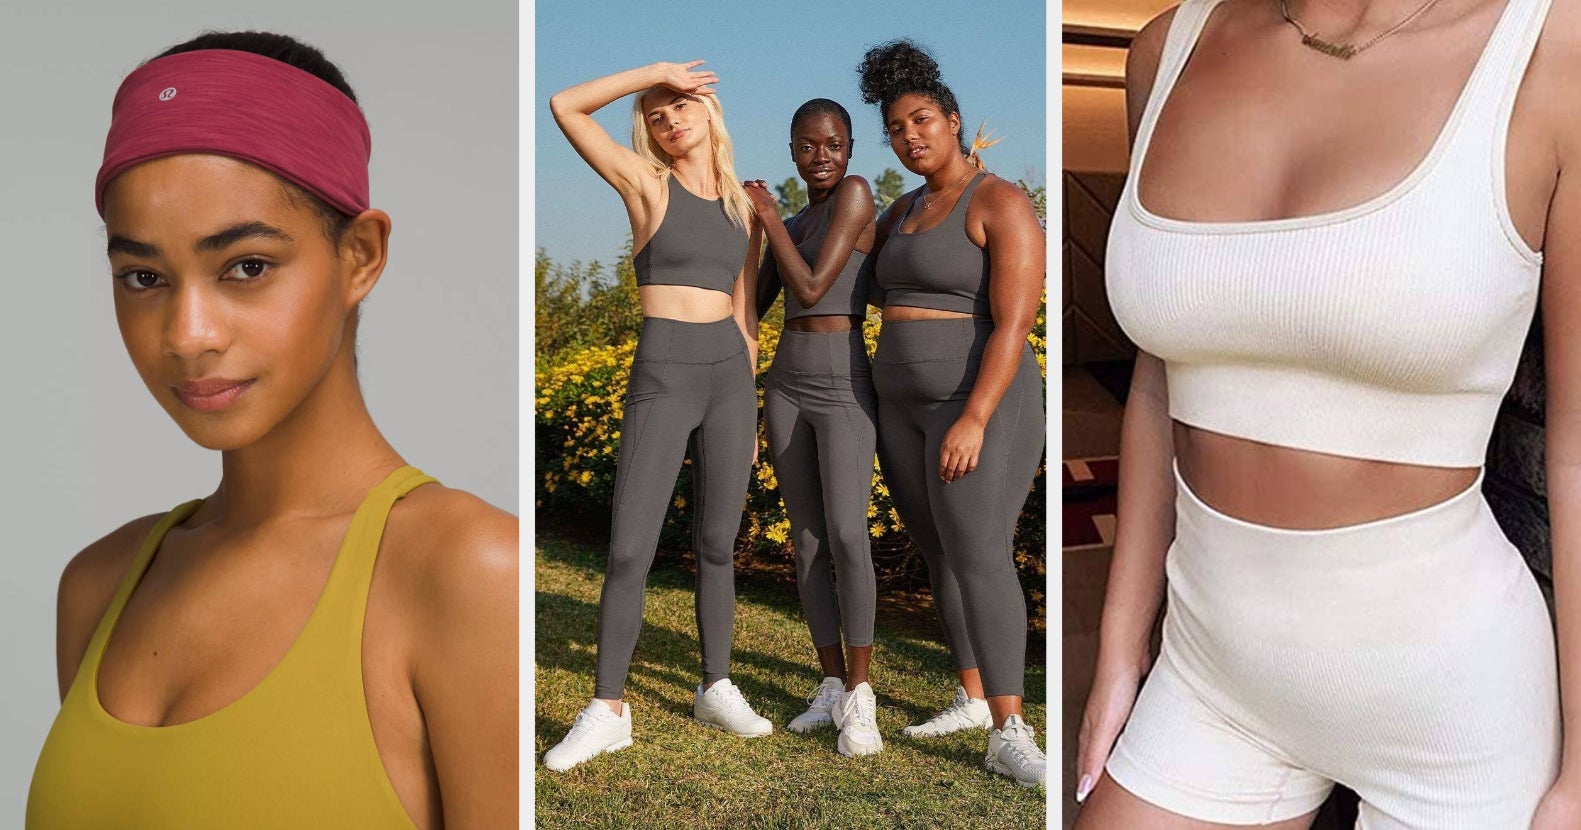 White Cleo Sport Bra by Girlfriend Collective on Sale